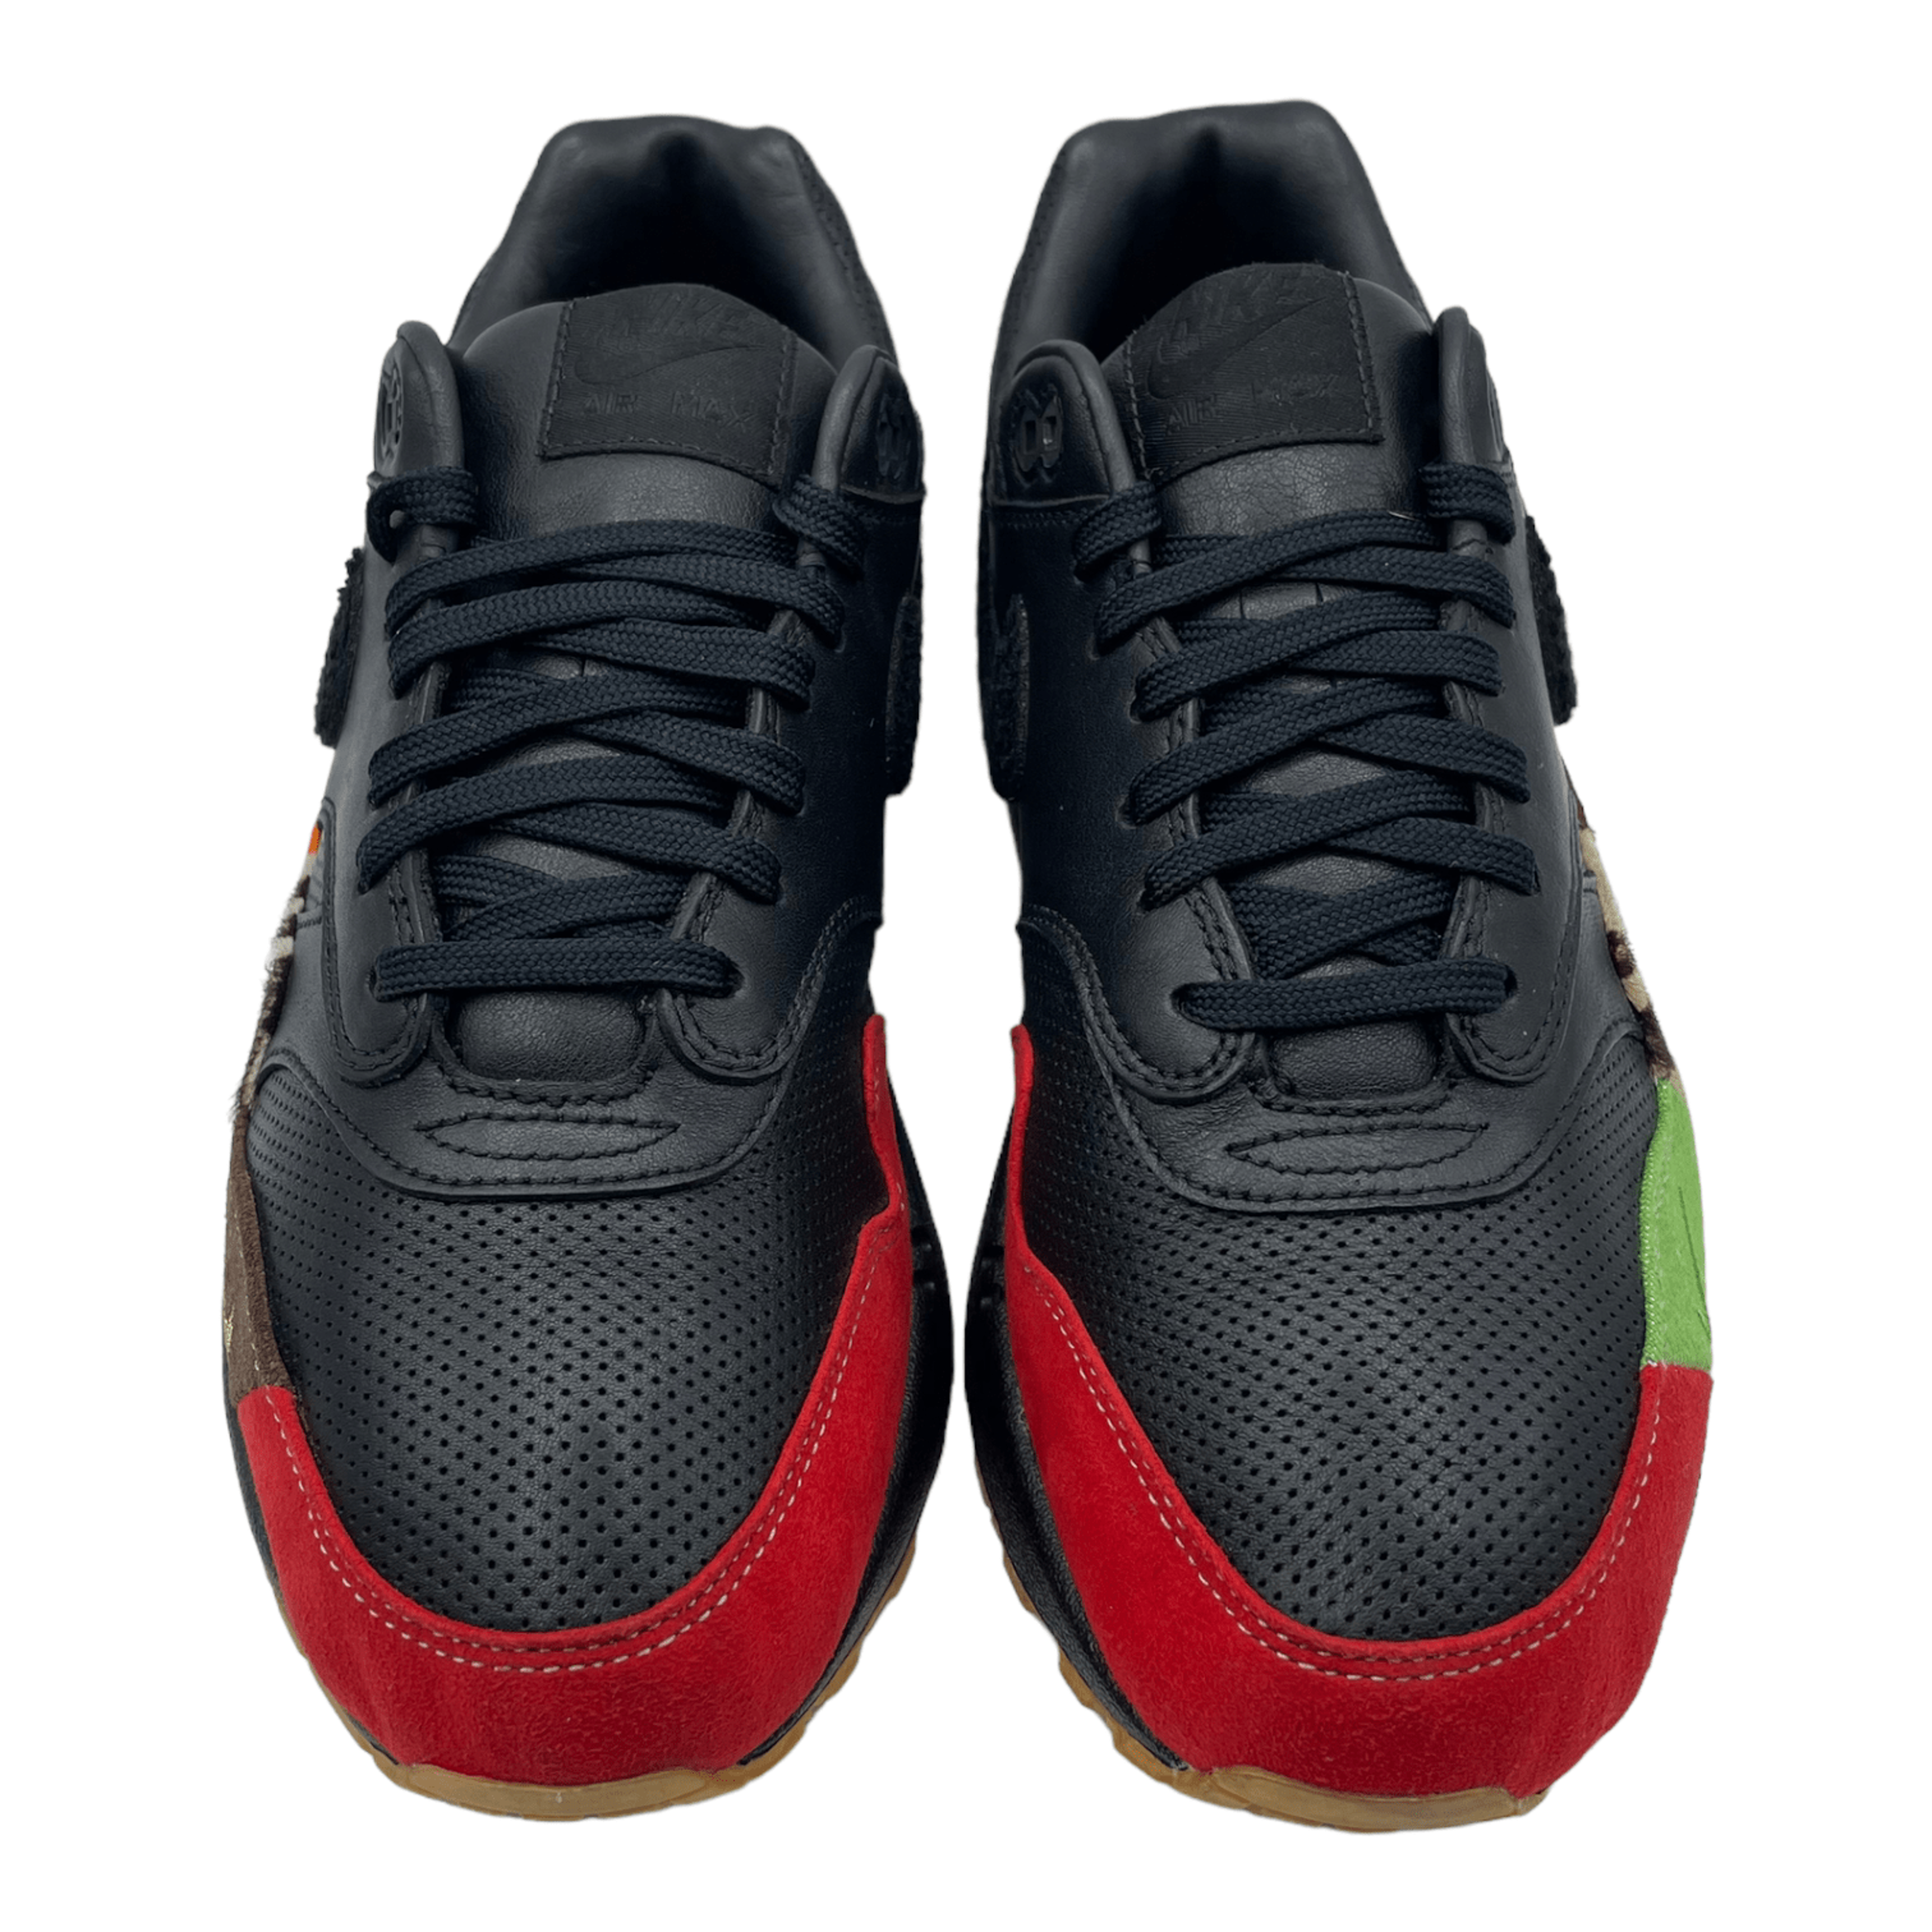 Alternate View 4 of Nike Air Max 1 Master Pre-Owned